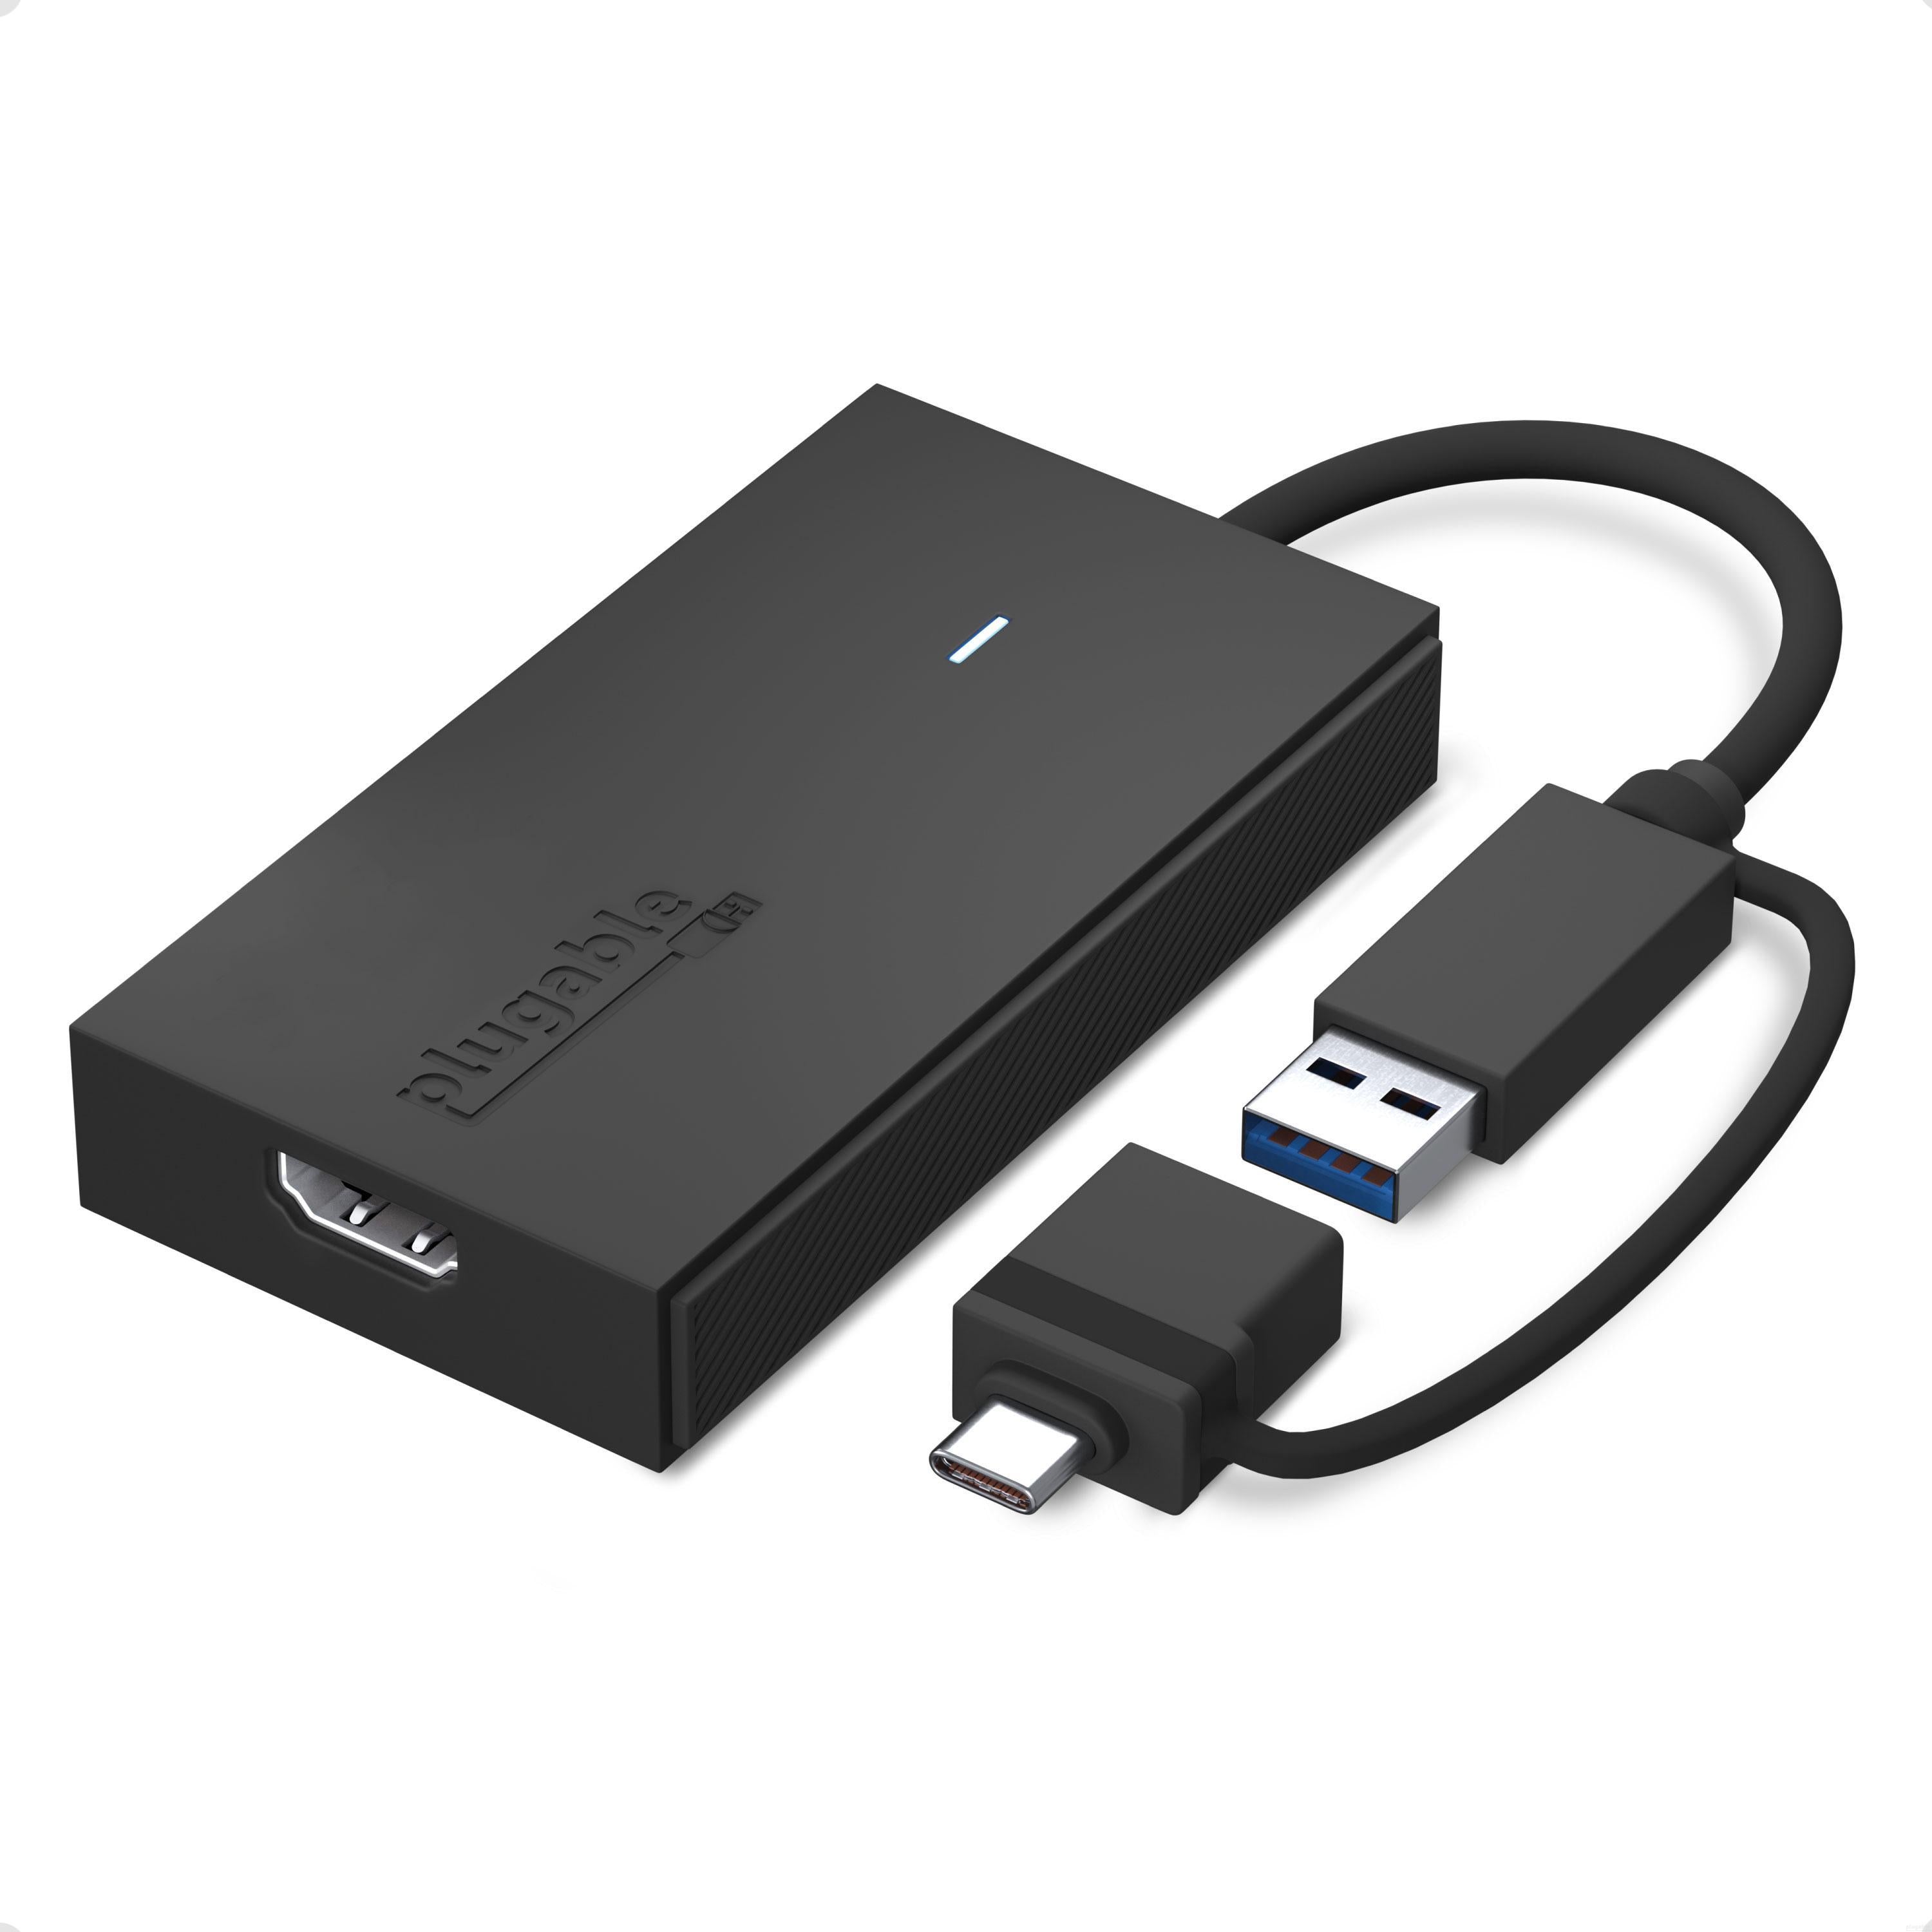 Plugable USB-C or USB 3.0 to HDMI Adapter – Technologies